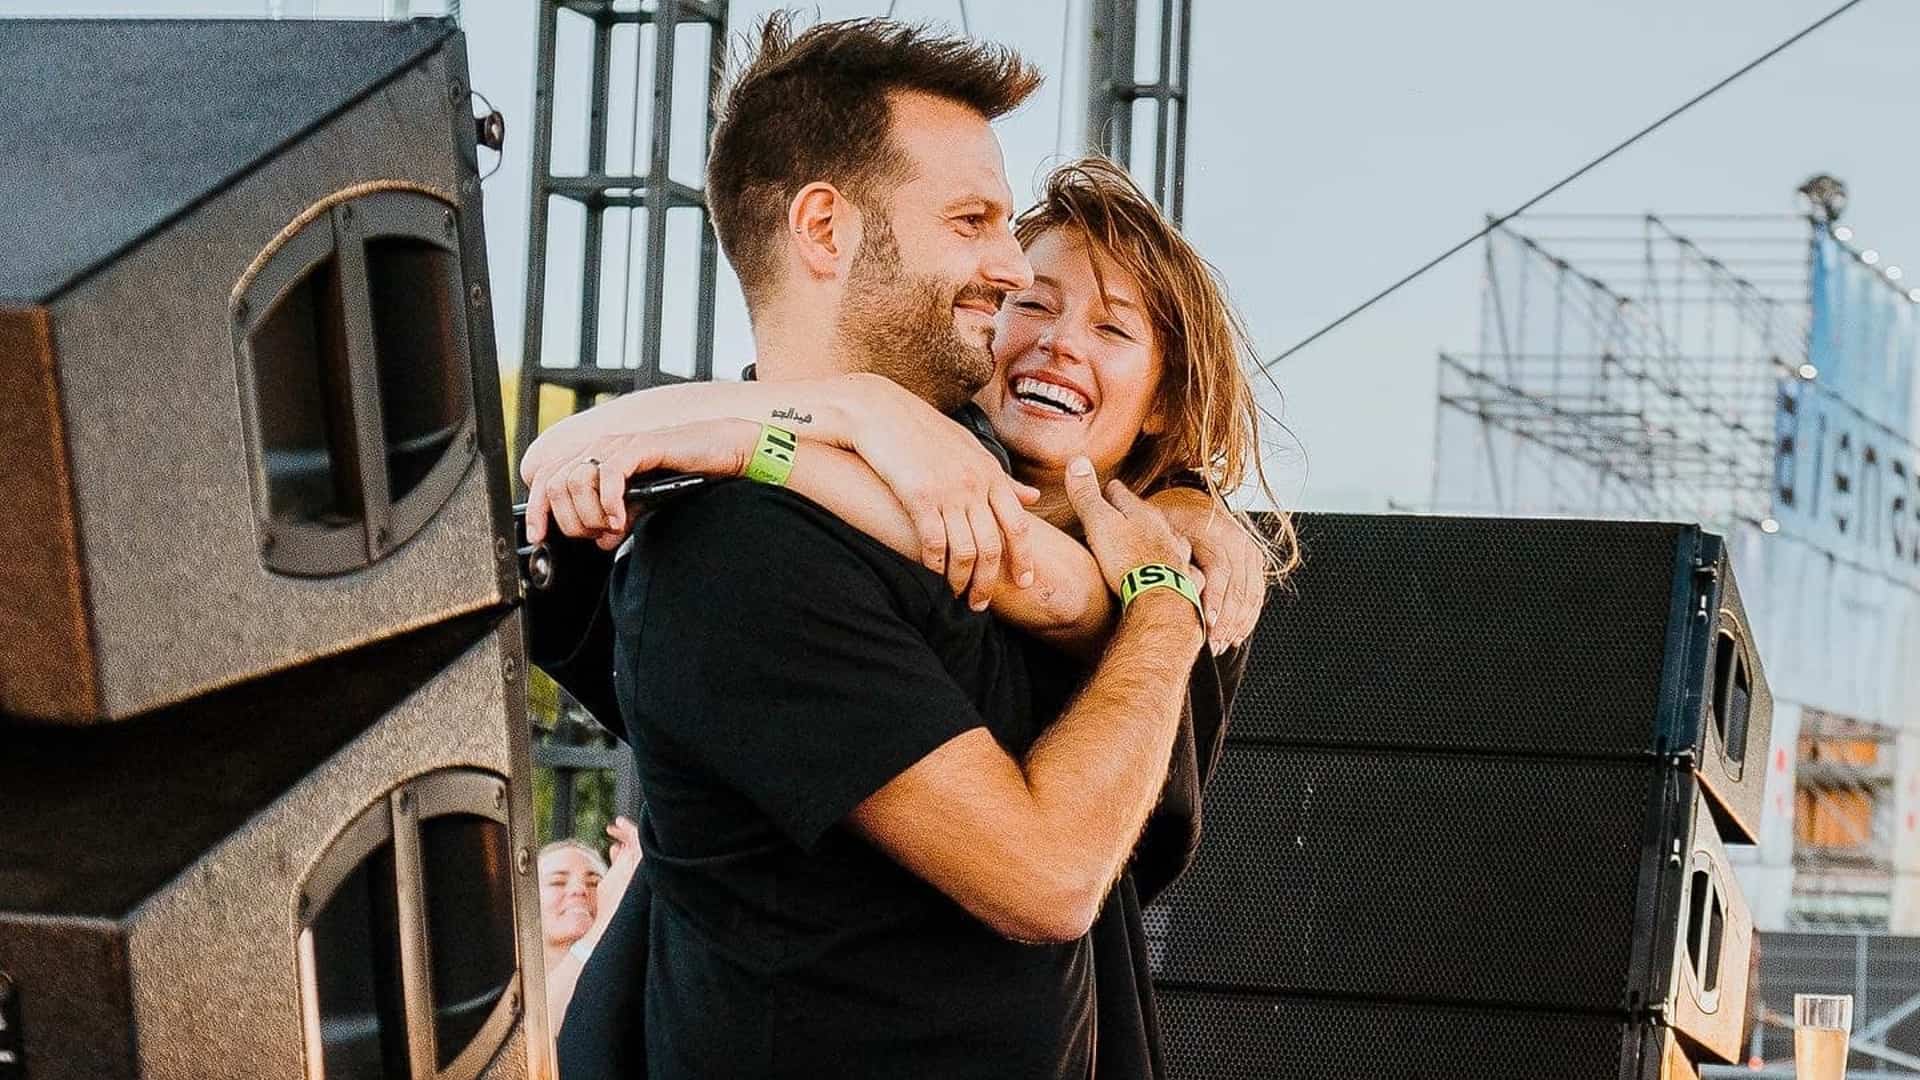 Charlotte de Witte & Enrico Sangiuliano's remix of ‘The Age Of Love’ is Beatport's best-selling techno track of 2021